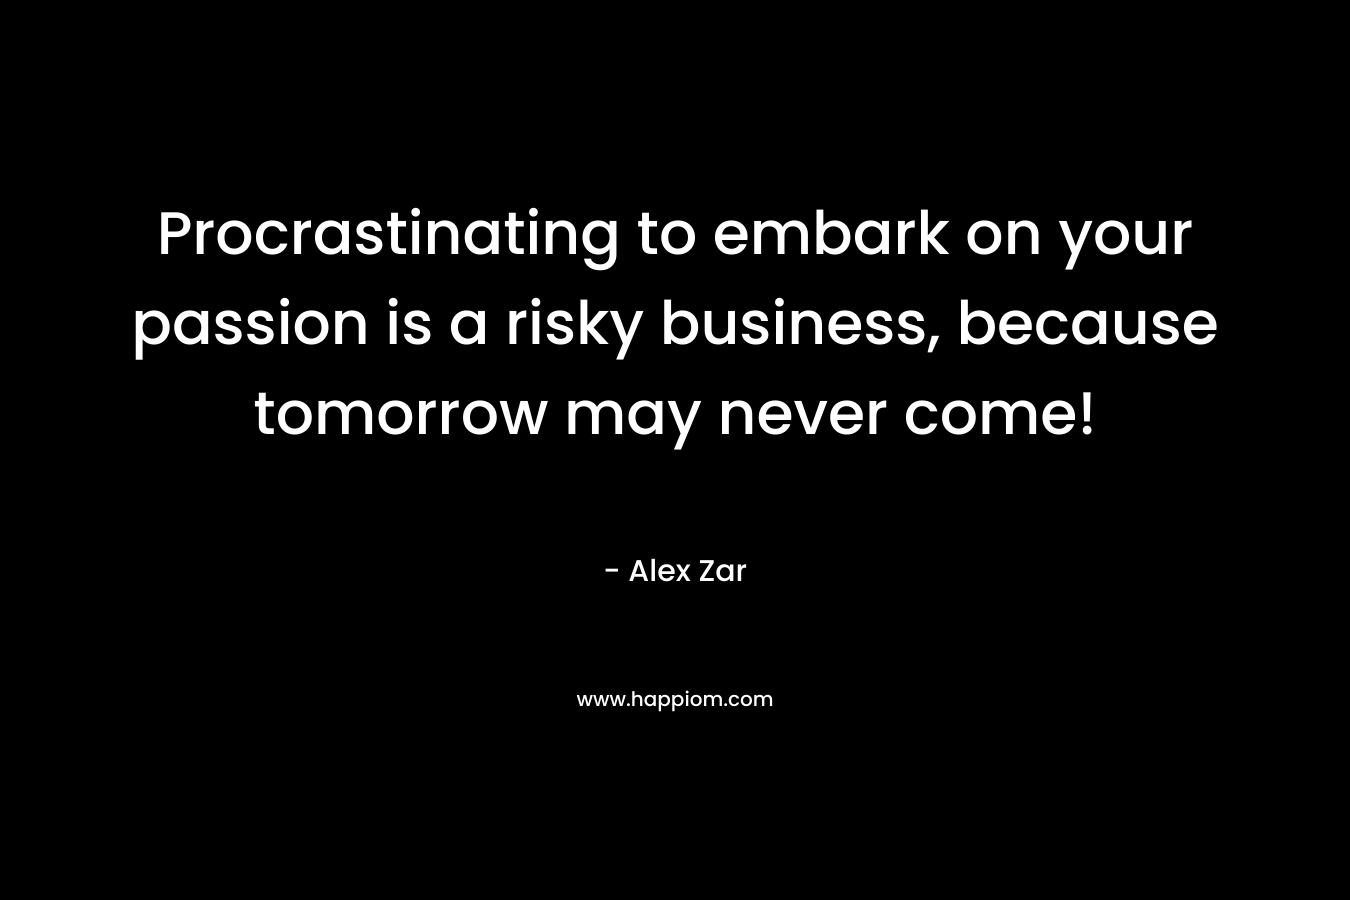 Procrastinating to embark on your passion is a risky business, because tomorrow may never come!